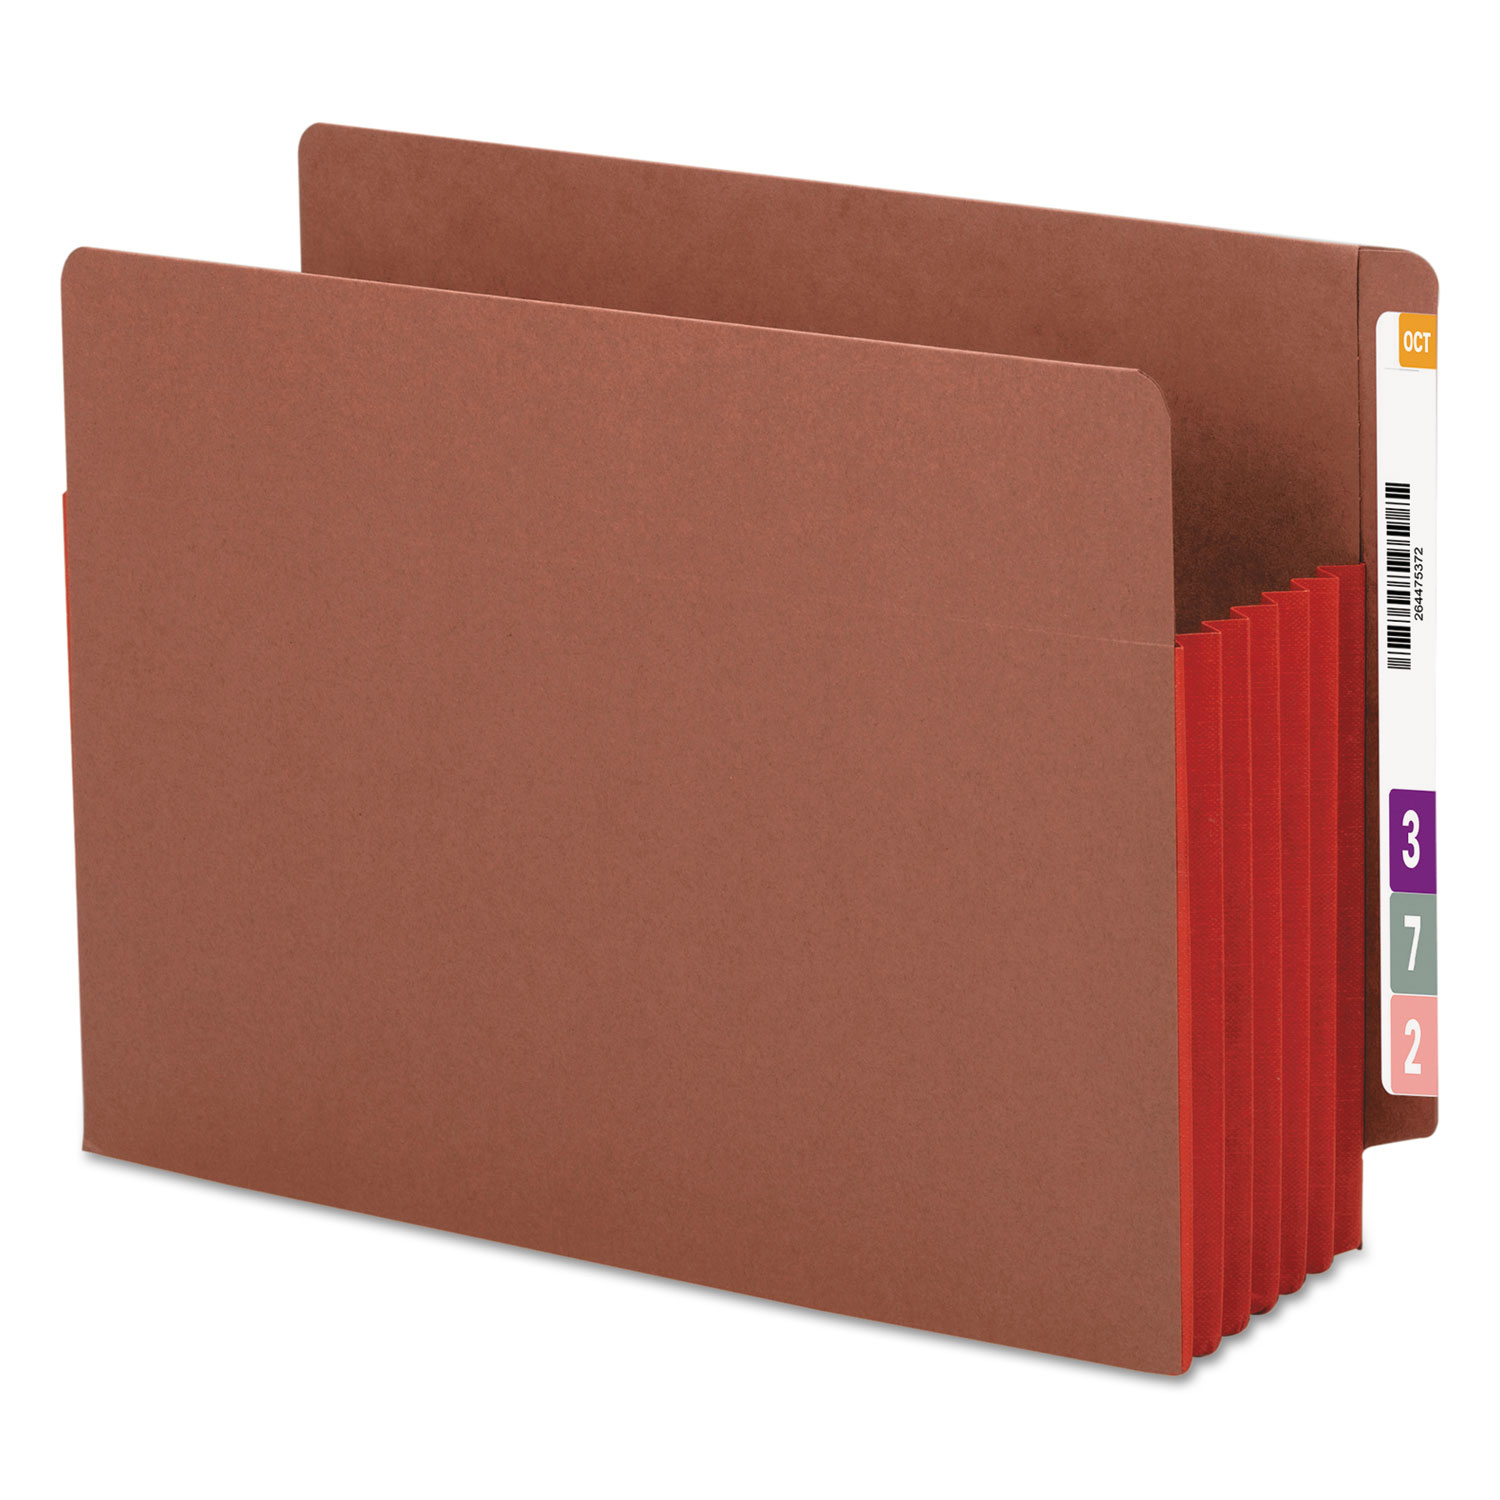  Smead 73696 Redrope Drop-Front End Tab File Pockets w/ Fully Lined Colored Gussets, 5.25 Expansion, Letter Size, Redrope/Red, 10/Box (SMD73696) 